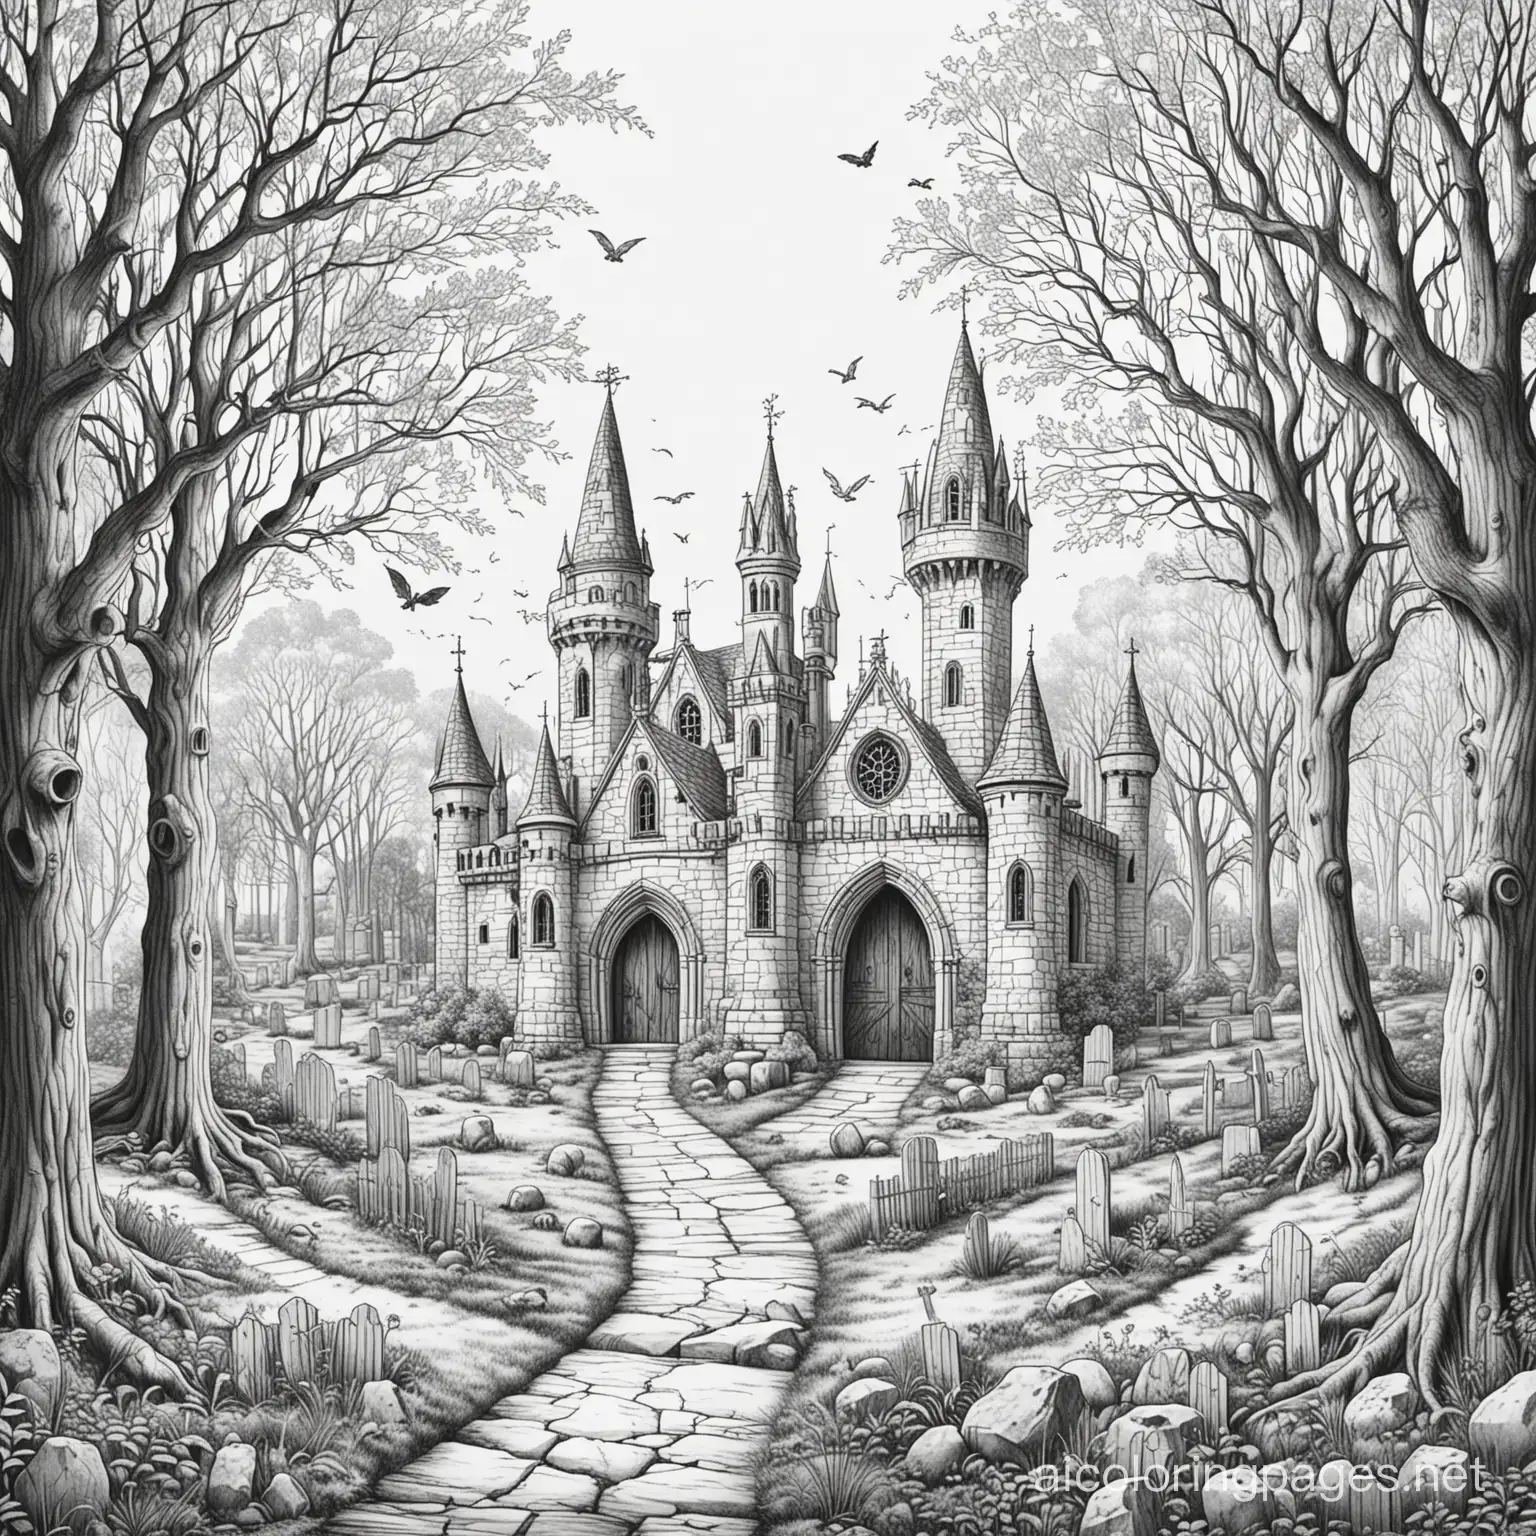 castle gothic graveyard trees, Coloring Page, black and white, line art, white background, Simplicity, Ample White Space. The background of the coloring page is plain white to make it easy for young children to color within the lines. The outlines of all the subjects are easy to distinguish, making it simple for kids to color without too much difficulty